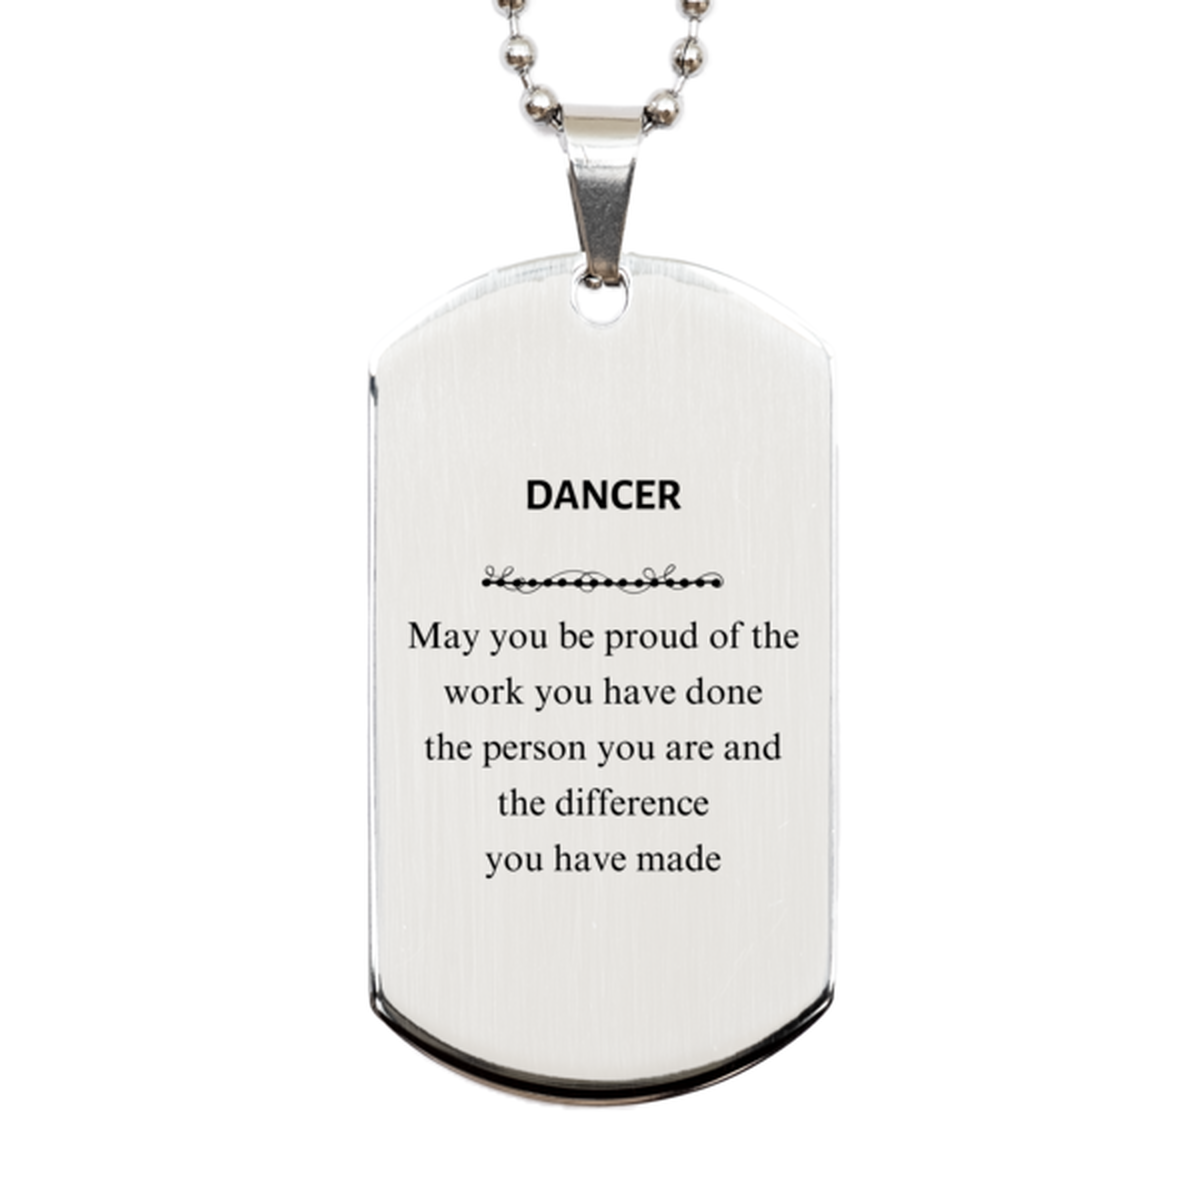 Dancer May you be proud of the work you have done, Retirement Dancer Silver Dog Tag for Colleague Appreciation Gifts Amazing for Dancer